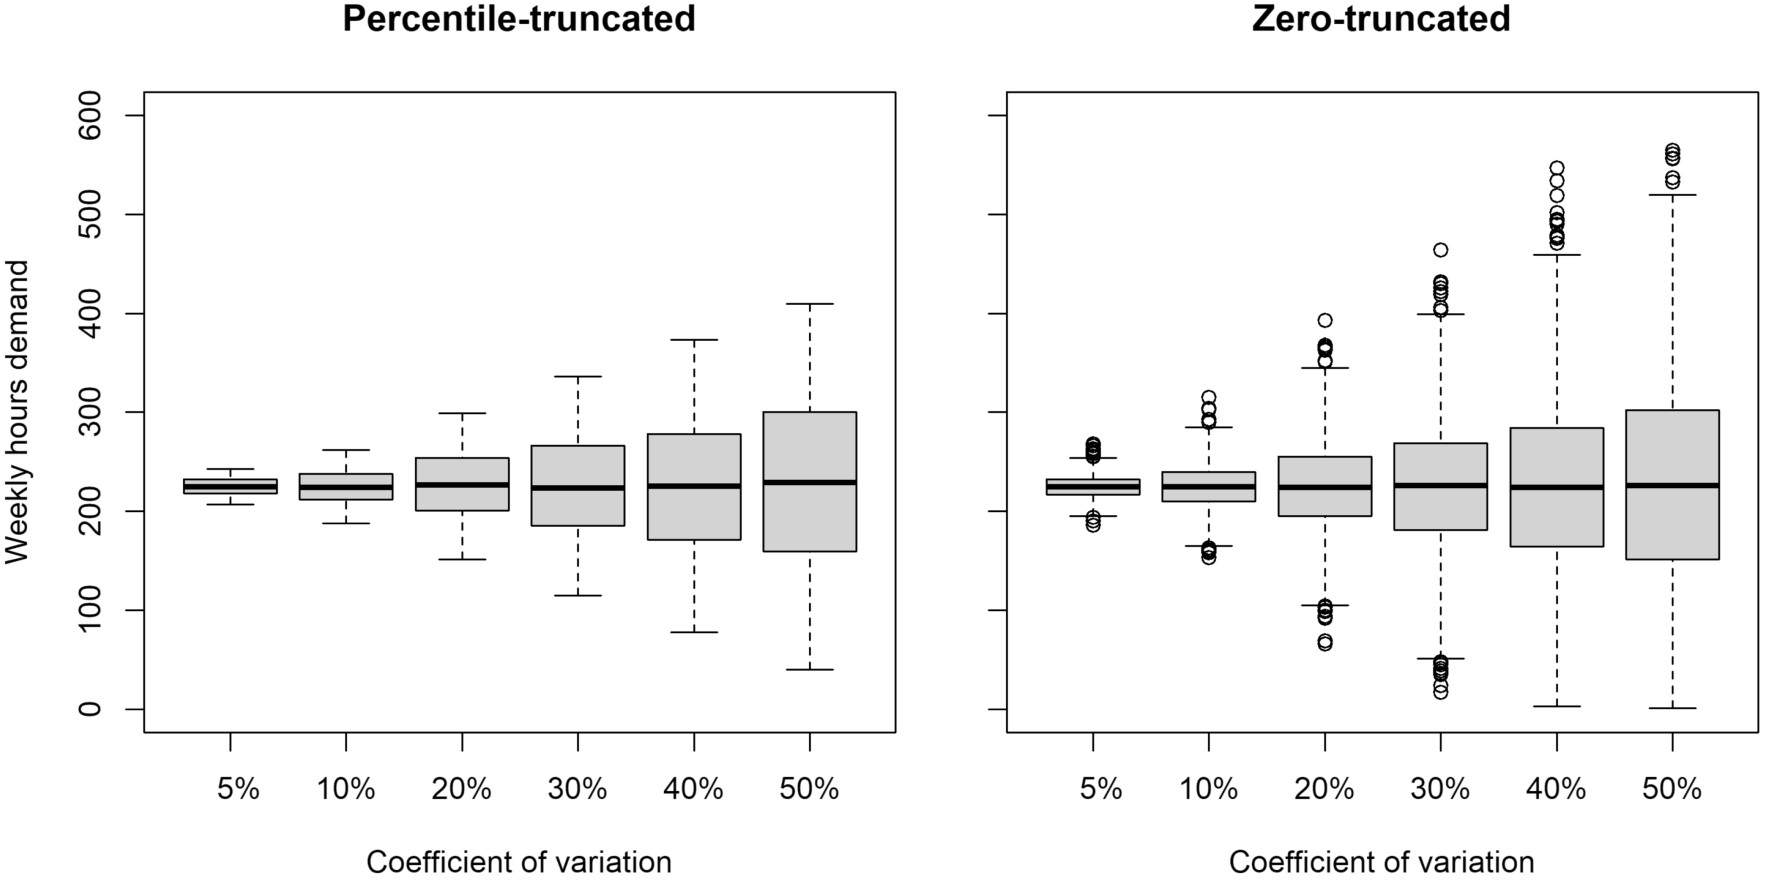 Percentile-truncated vs zero-truncated, in the second department with 6 coefficients of variation.